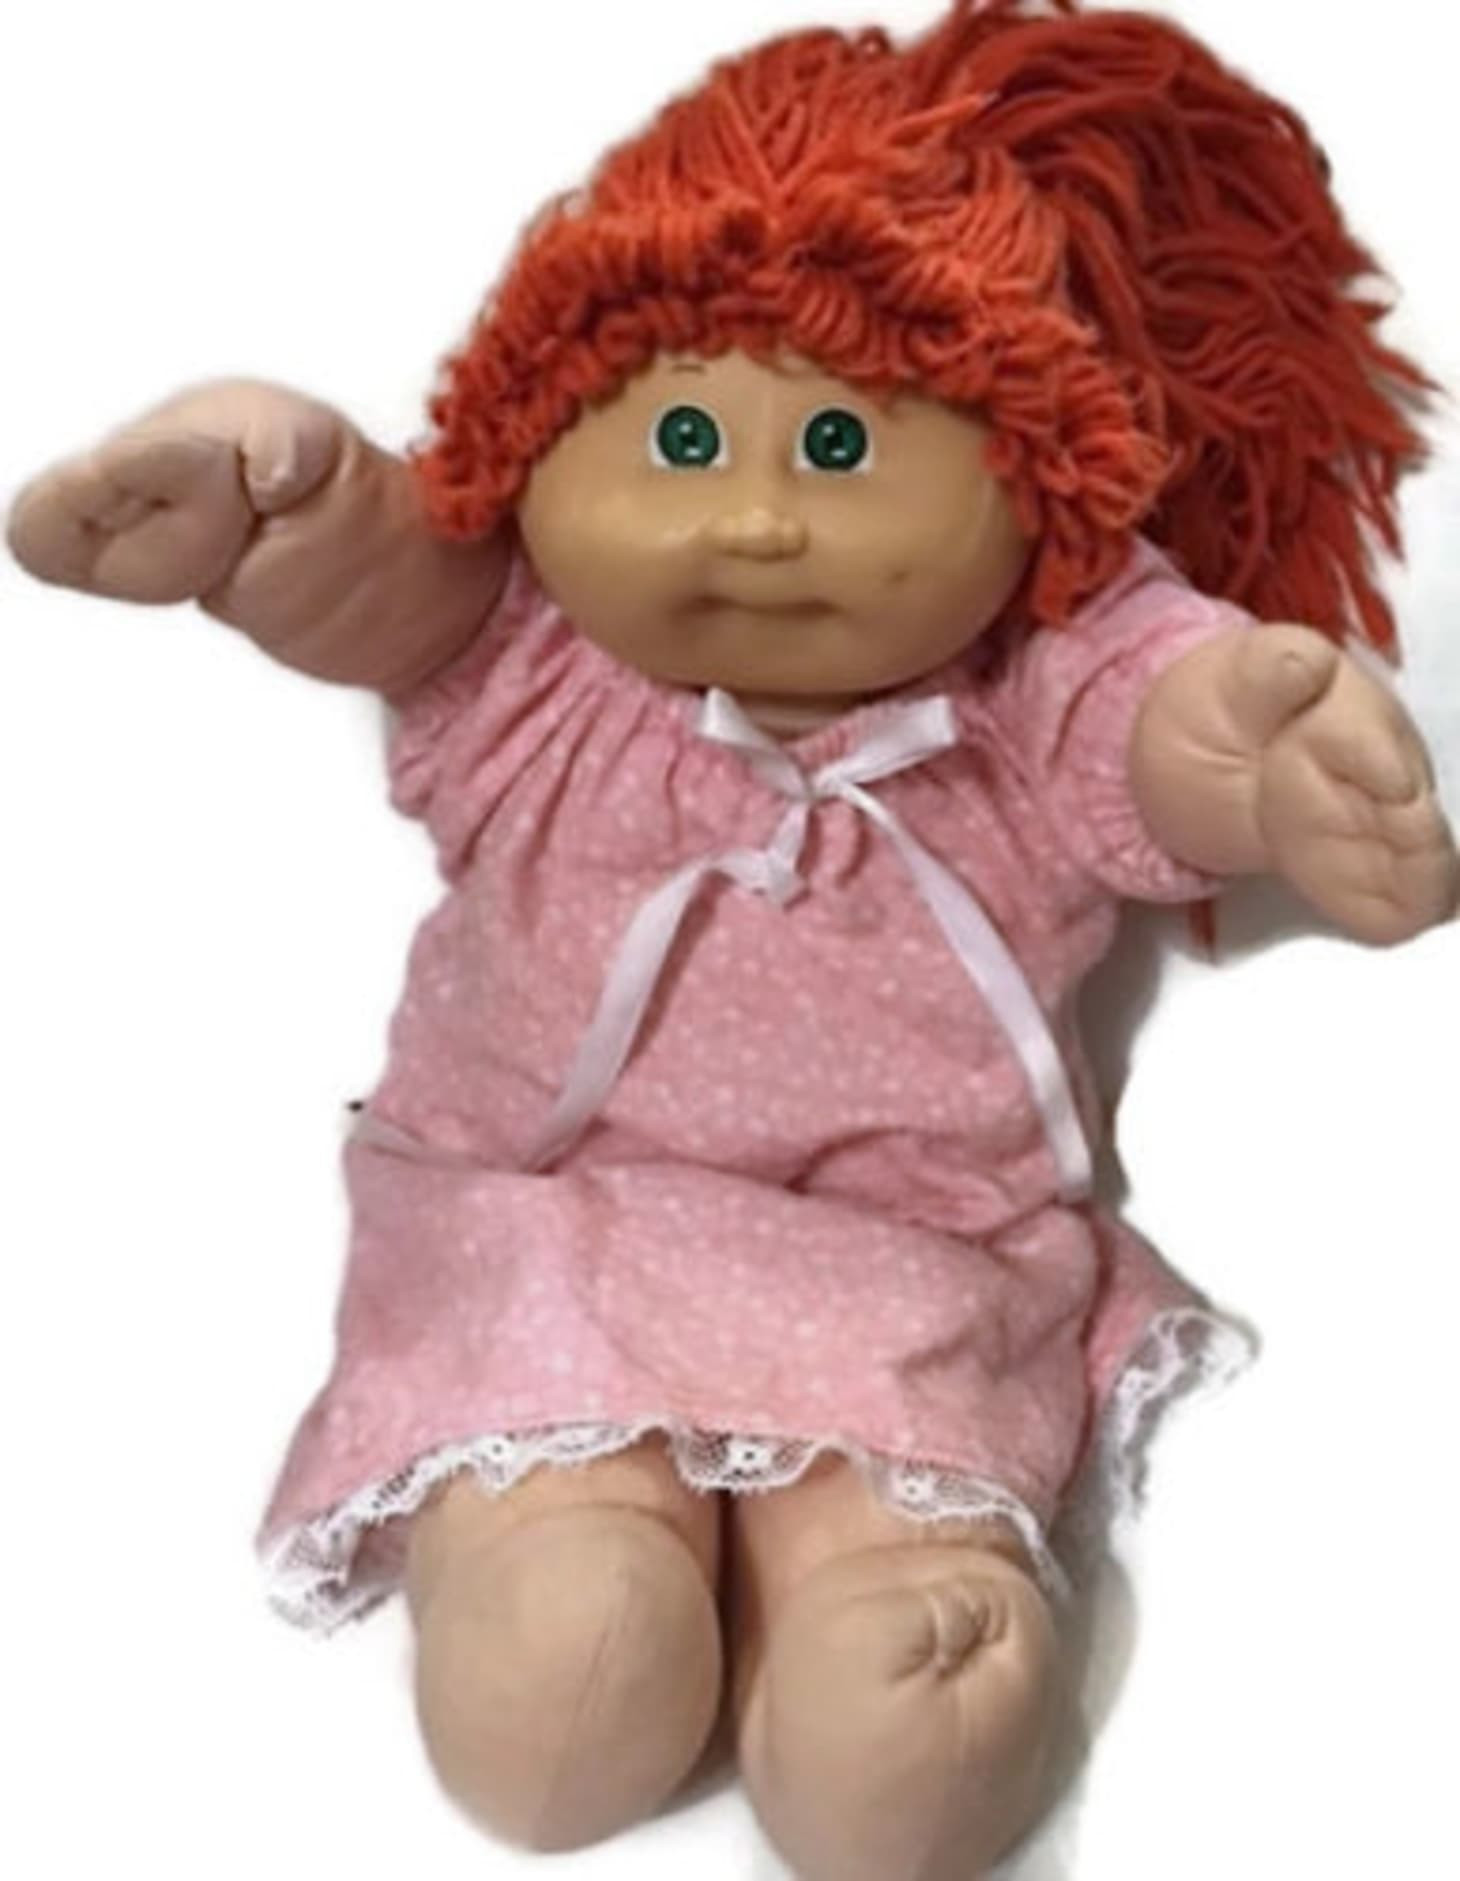 Cabbage Patch Kids Value Awesome Ebay Cabbage Patch Kids Selling Price